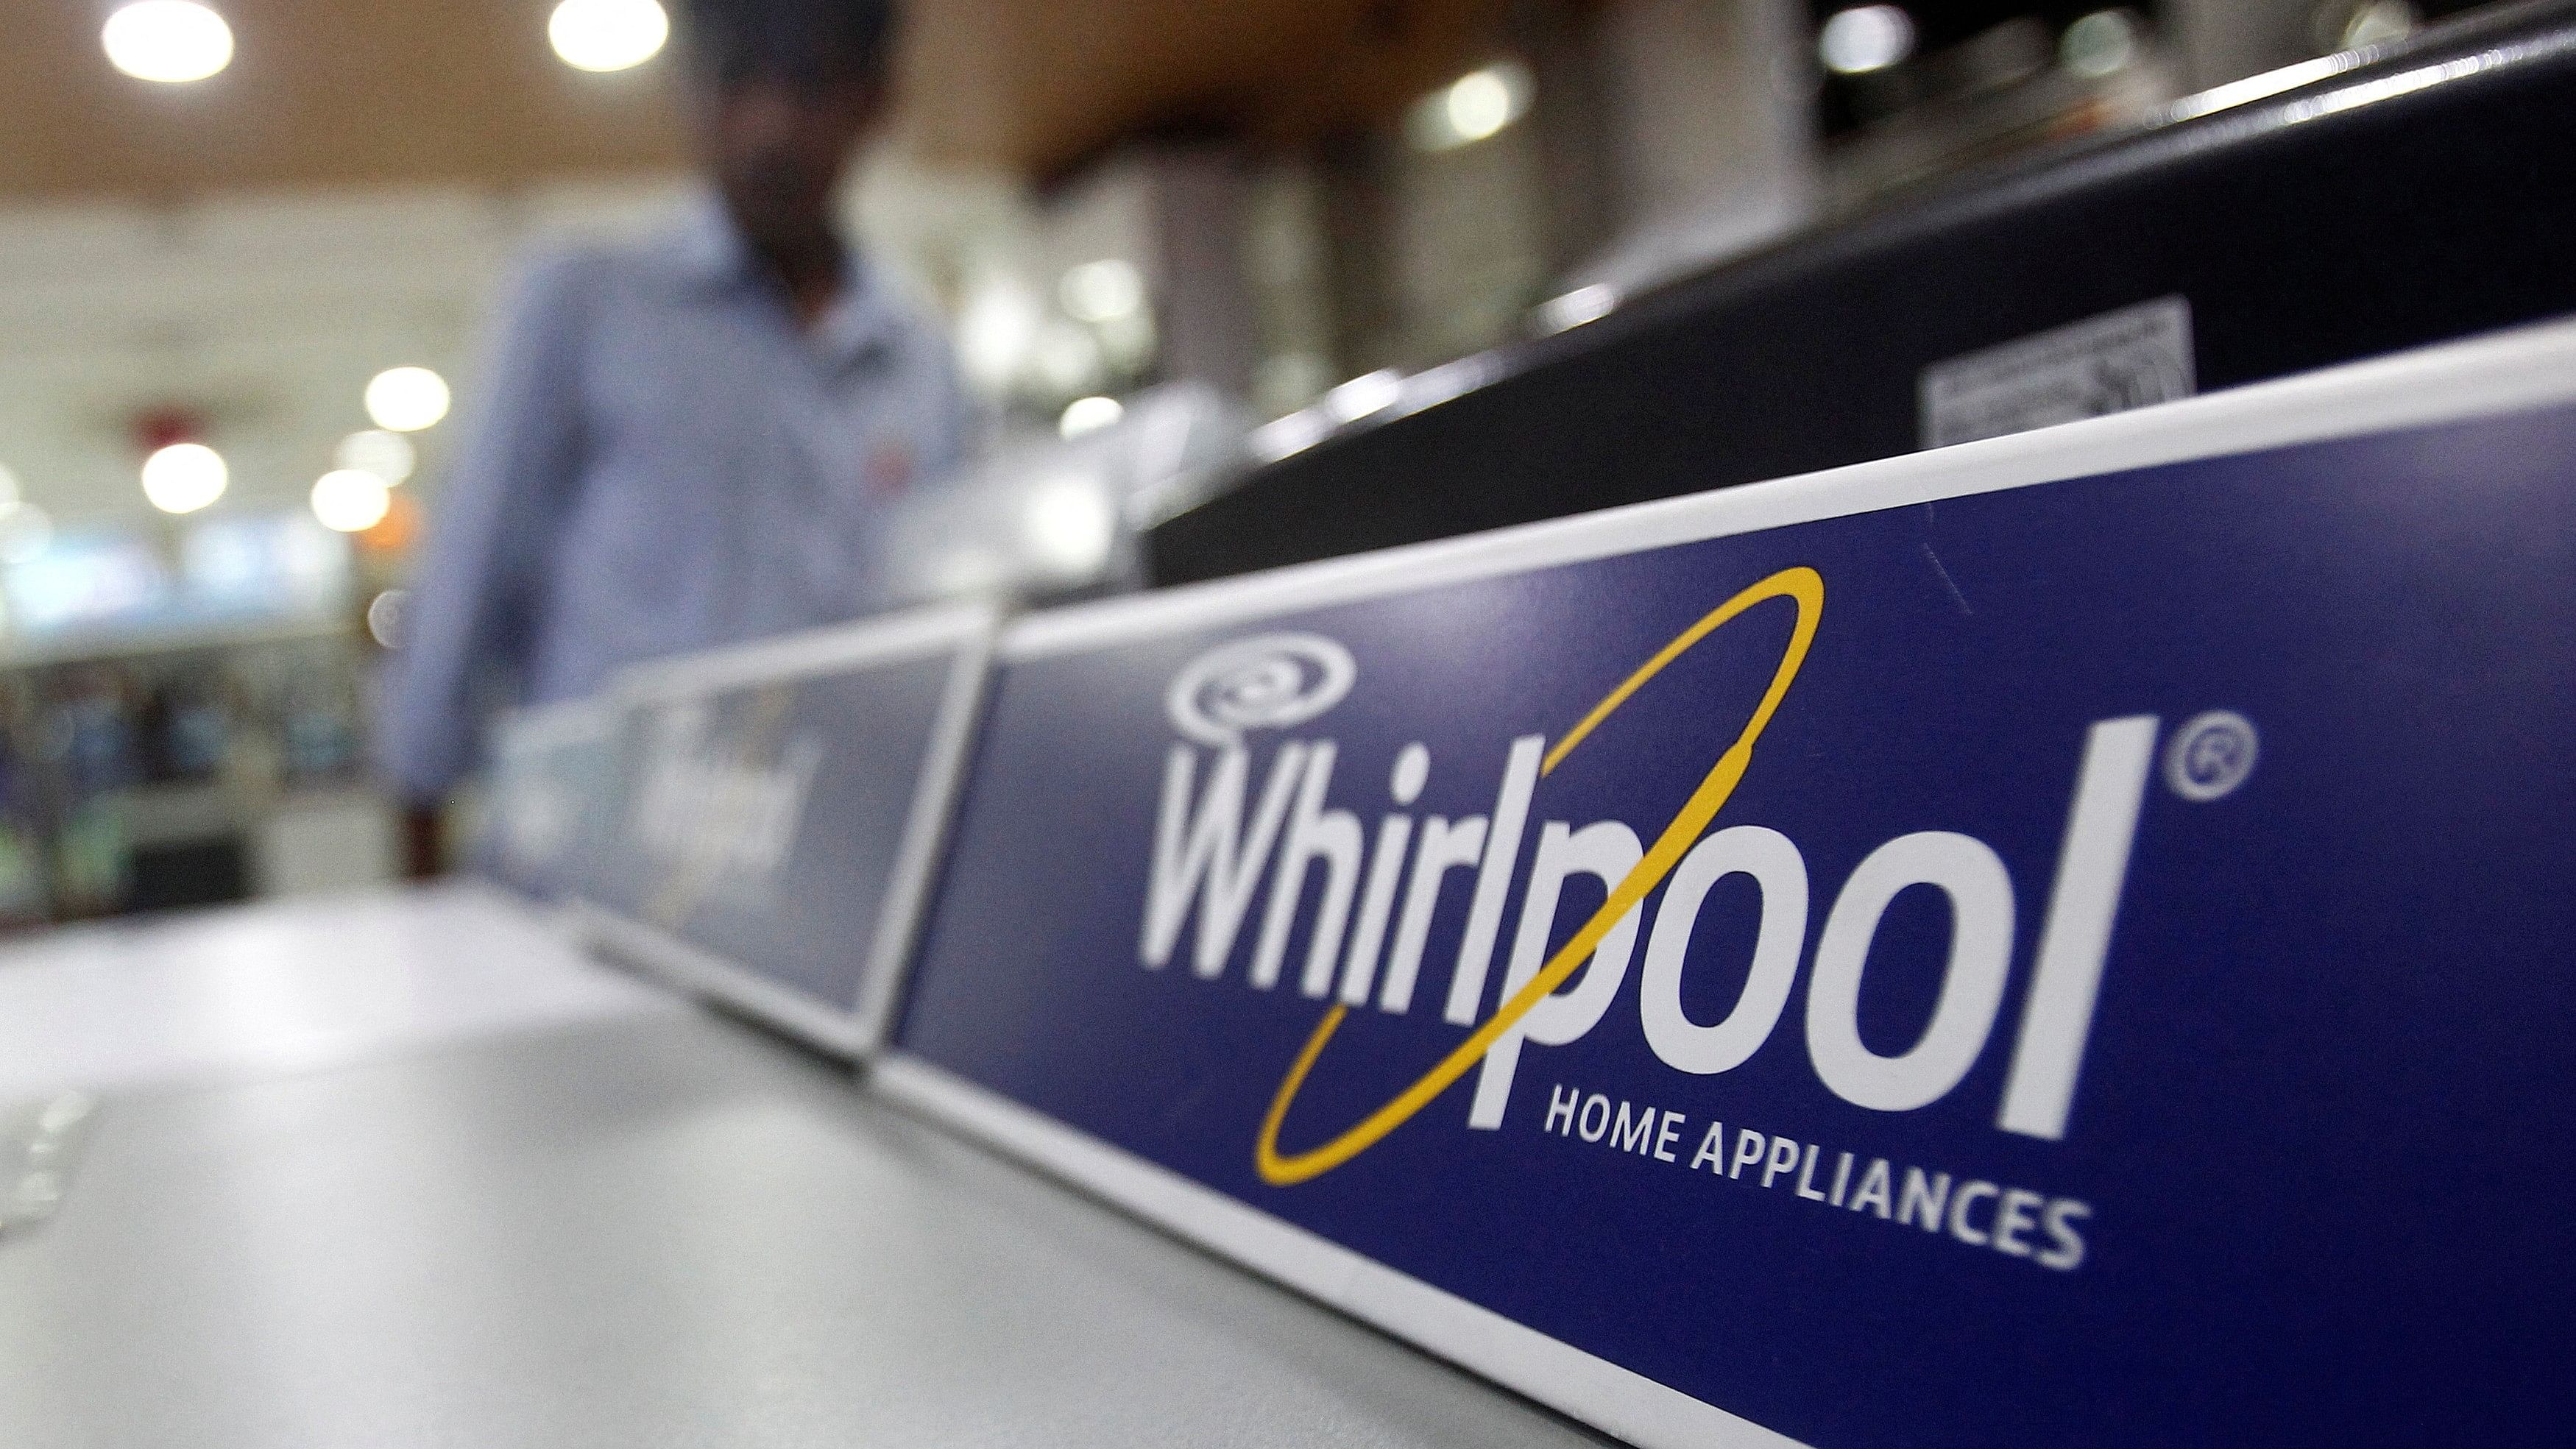 <div class="paragraphs"><p>An employee stands next to a Whirlpool washing machine inside a home appliances showroom.</p></div>